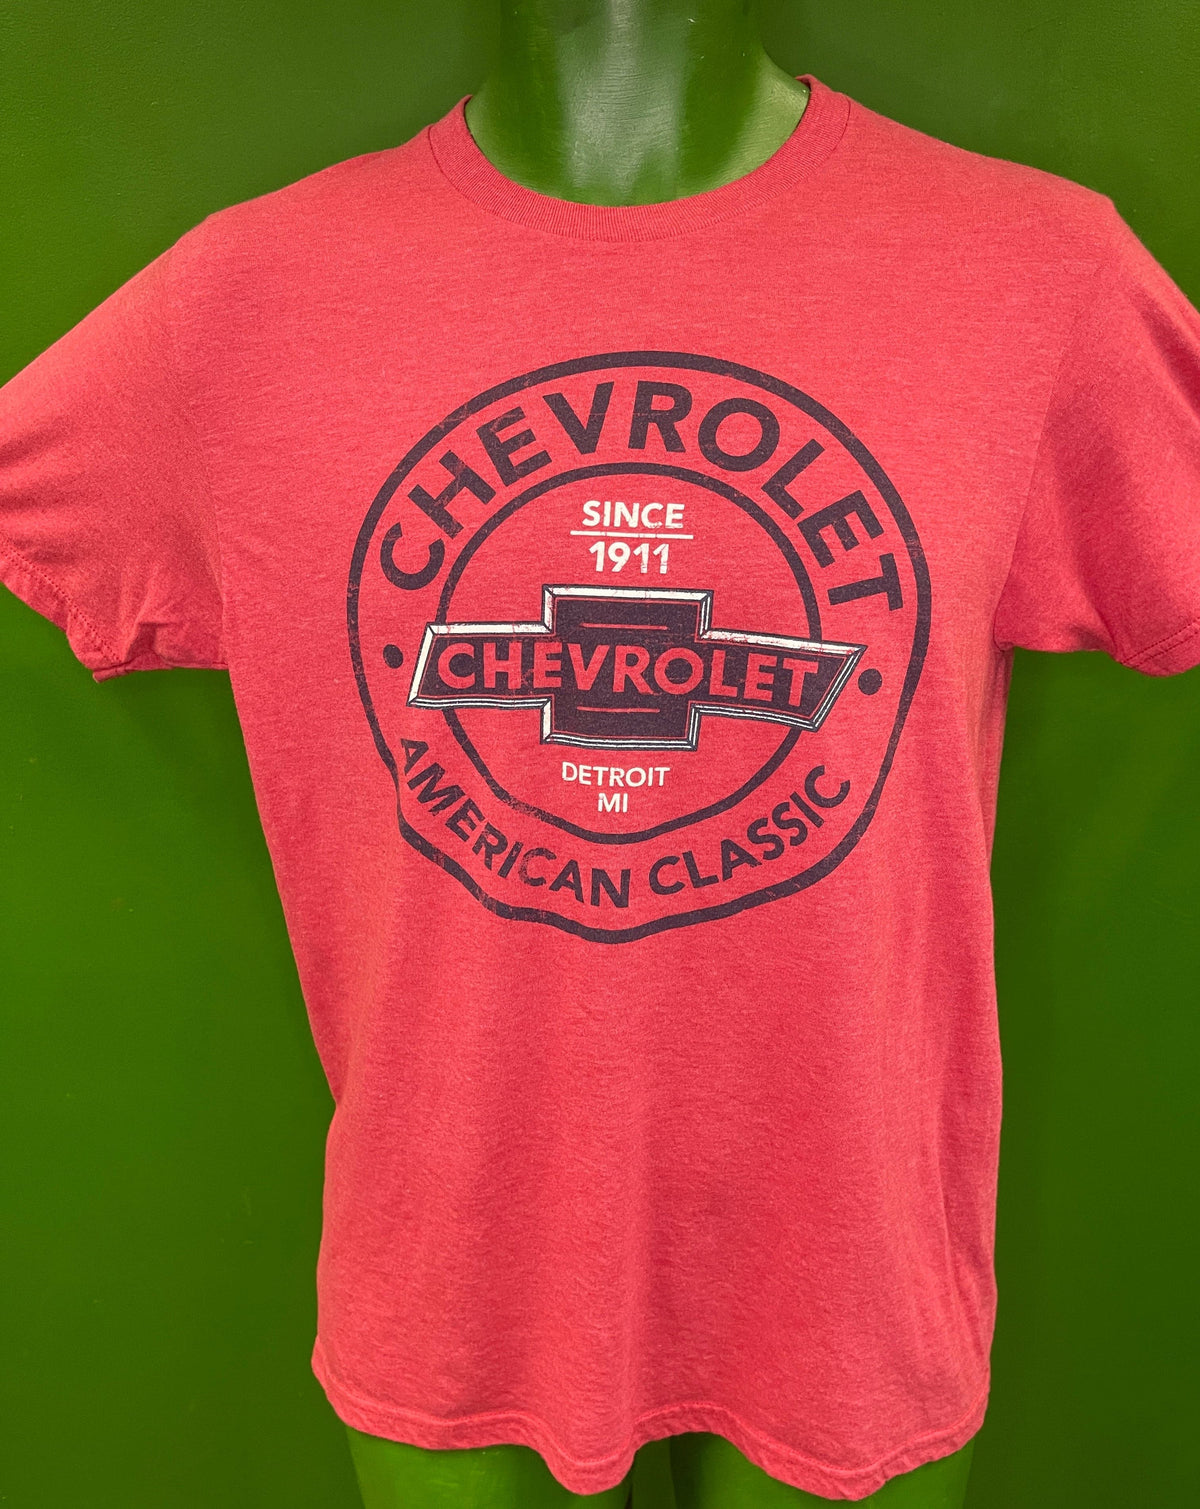 Chevrolet American Classic Soft Red T-Shirt Men's Small